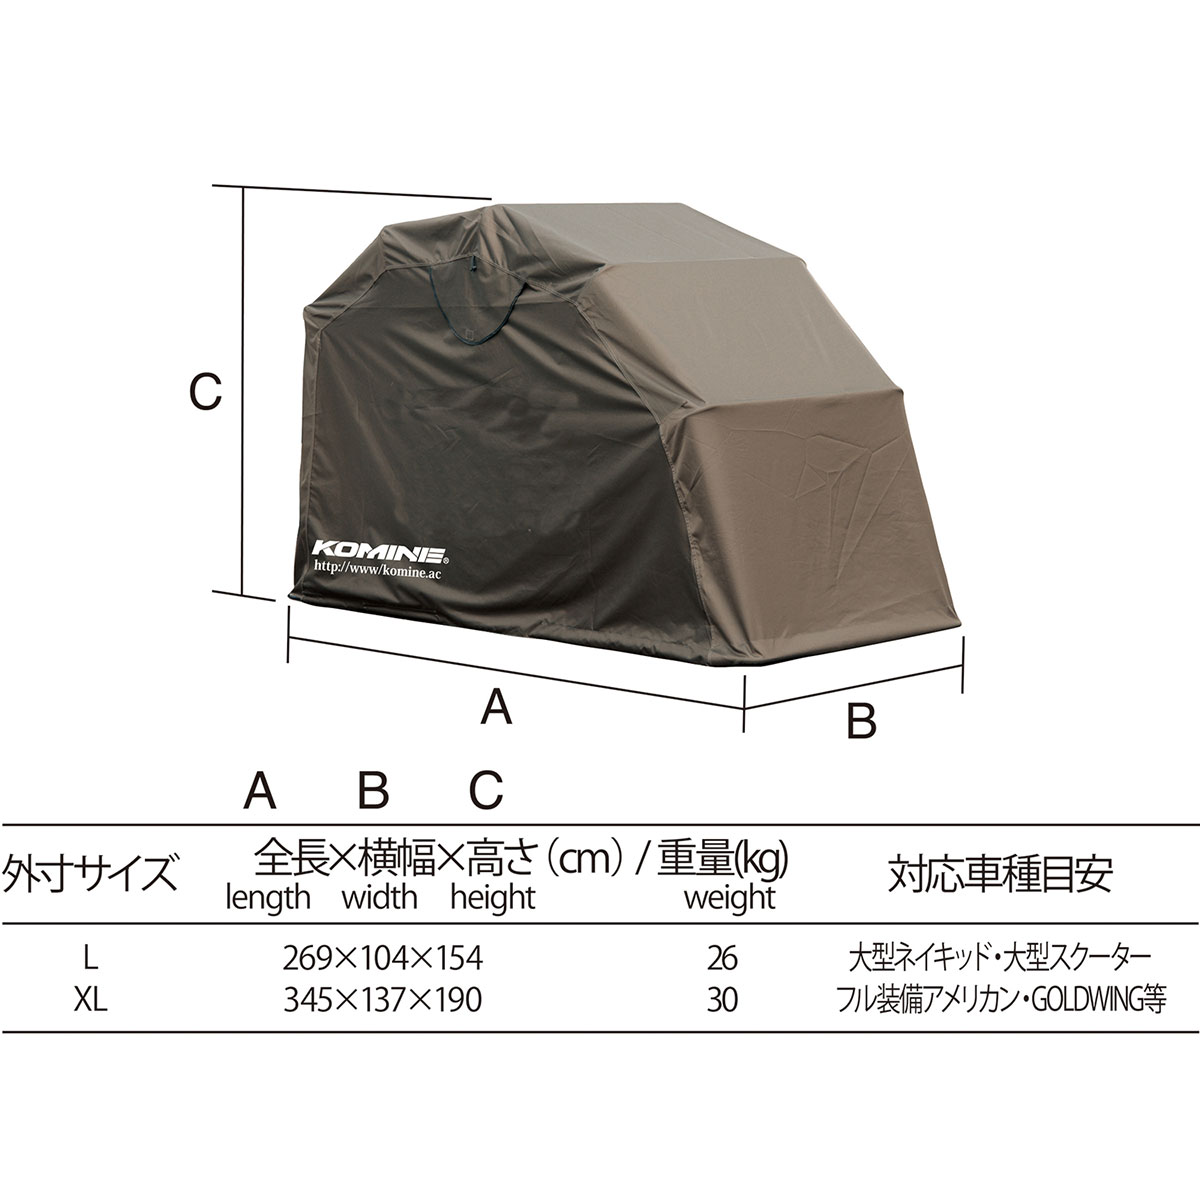 Ak 103 Motorcycle Dome コミネ Komine